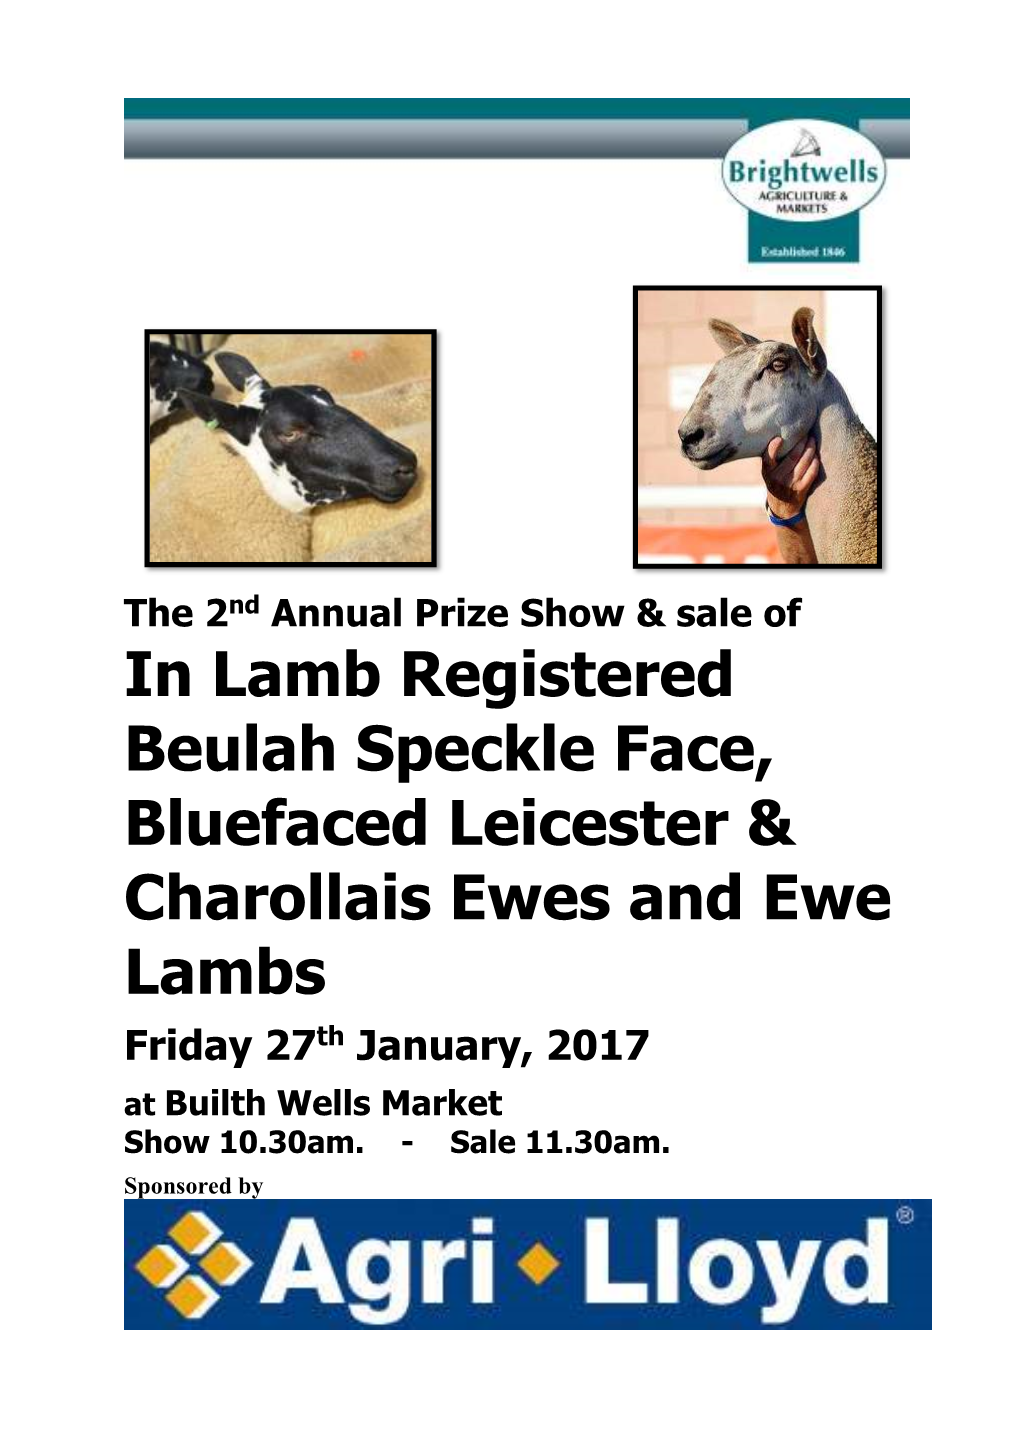 In Lamb Registered Beulah Speckle Face, Bluefaced Leicester & Charollais Ewes and Ewe